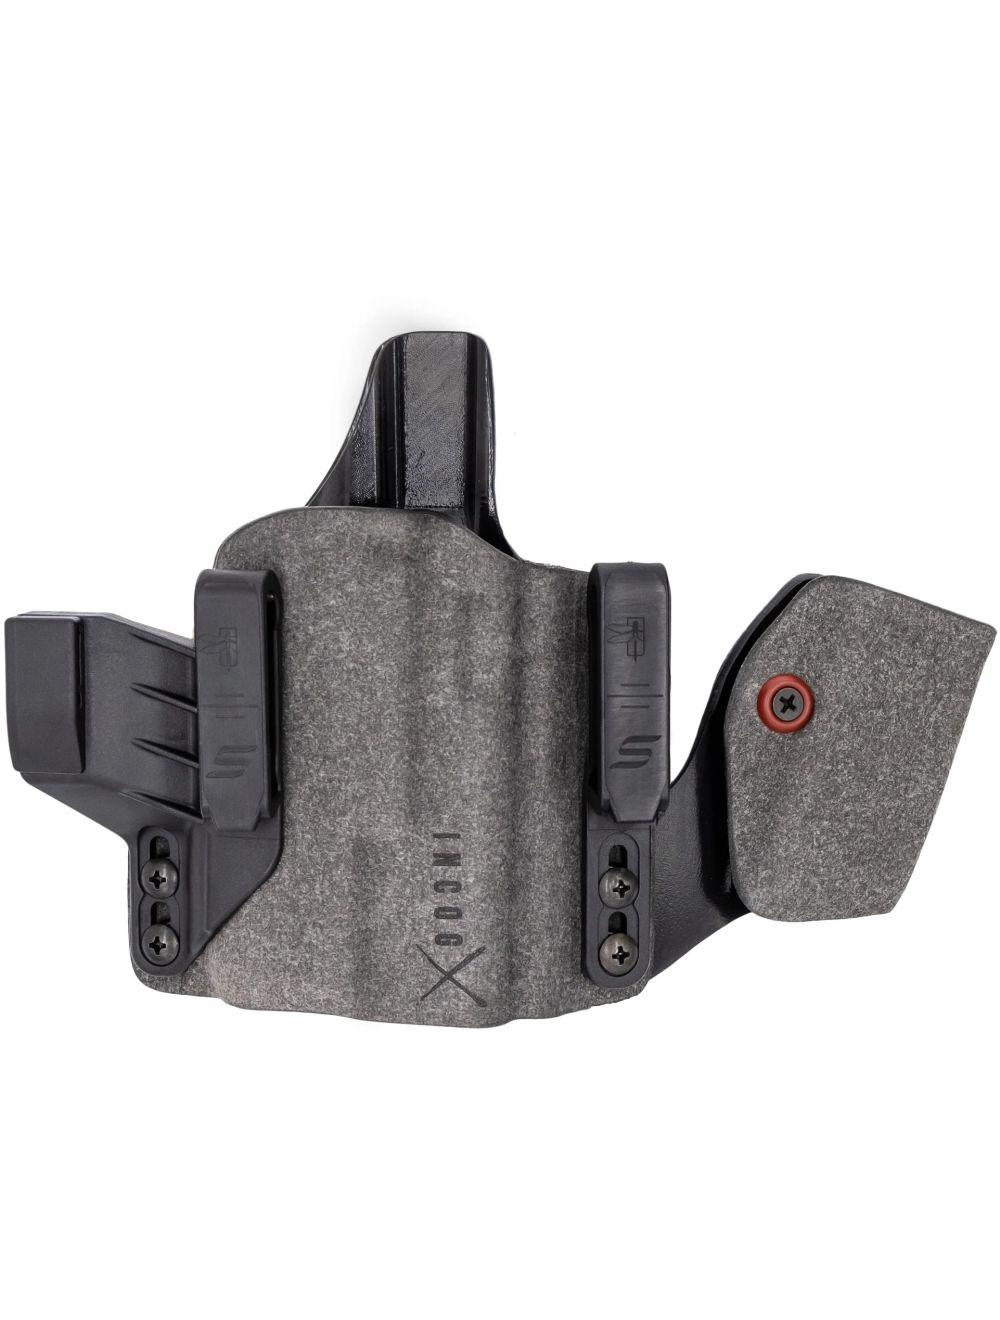 IncogX IWB Holster for Sig Sauer P320 w/ Light